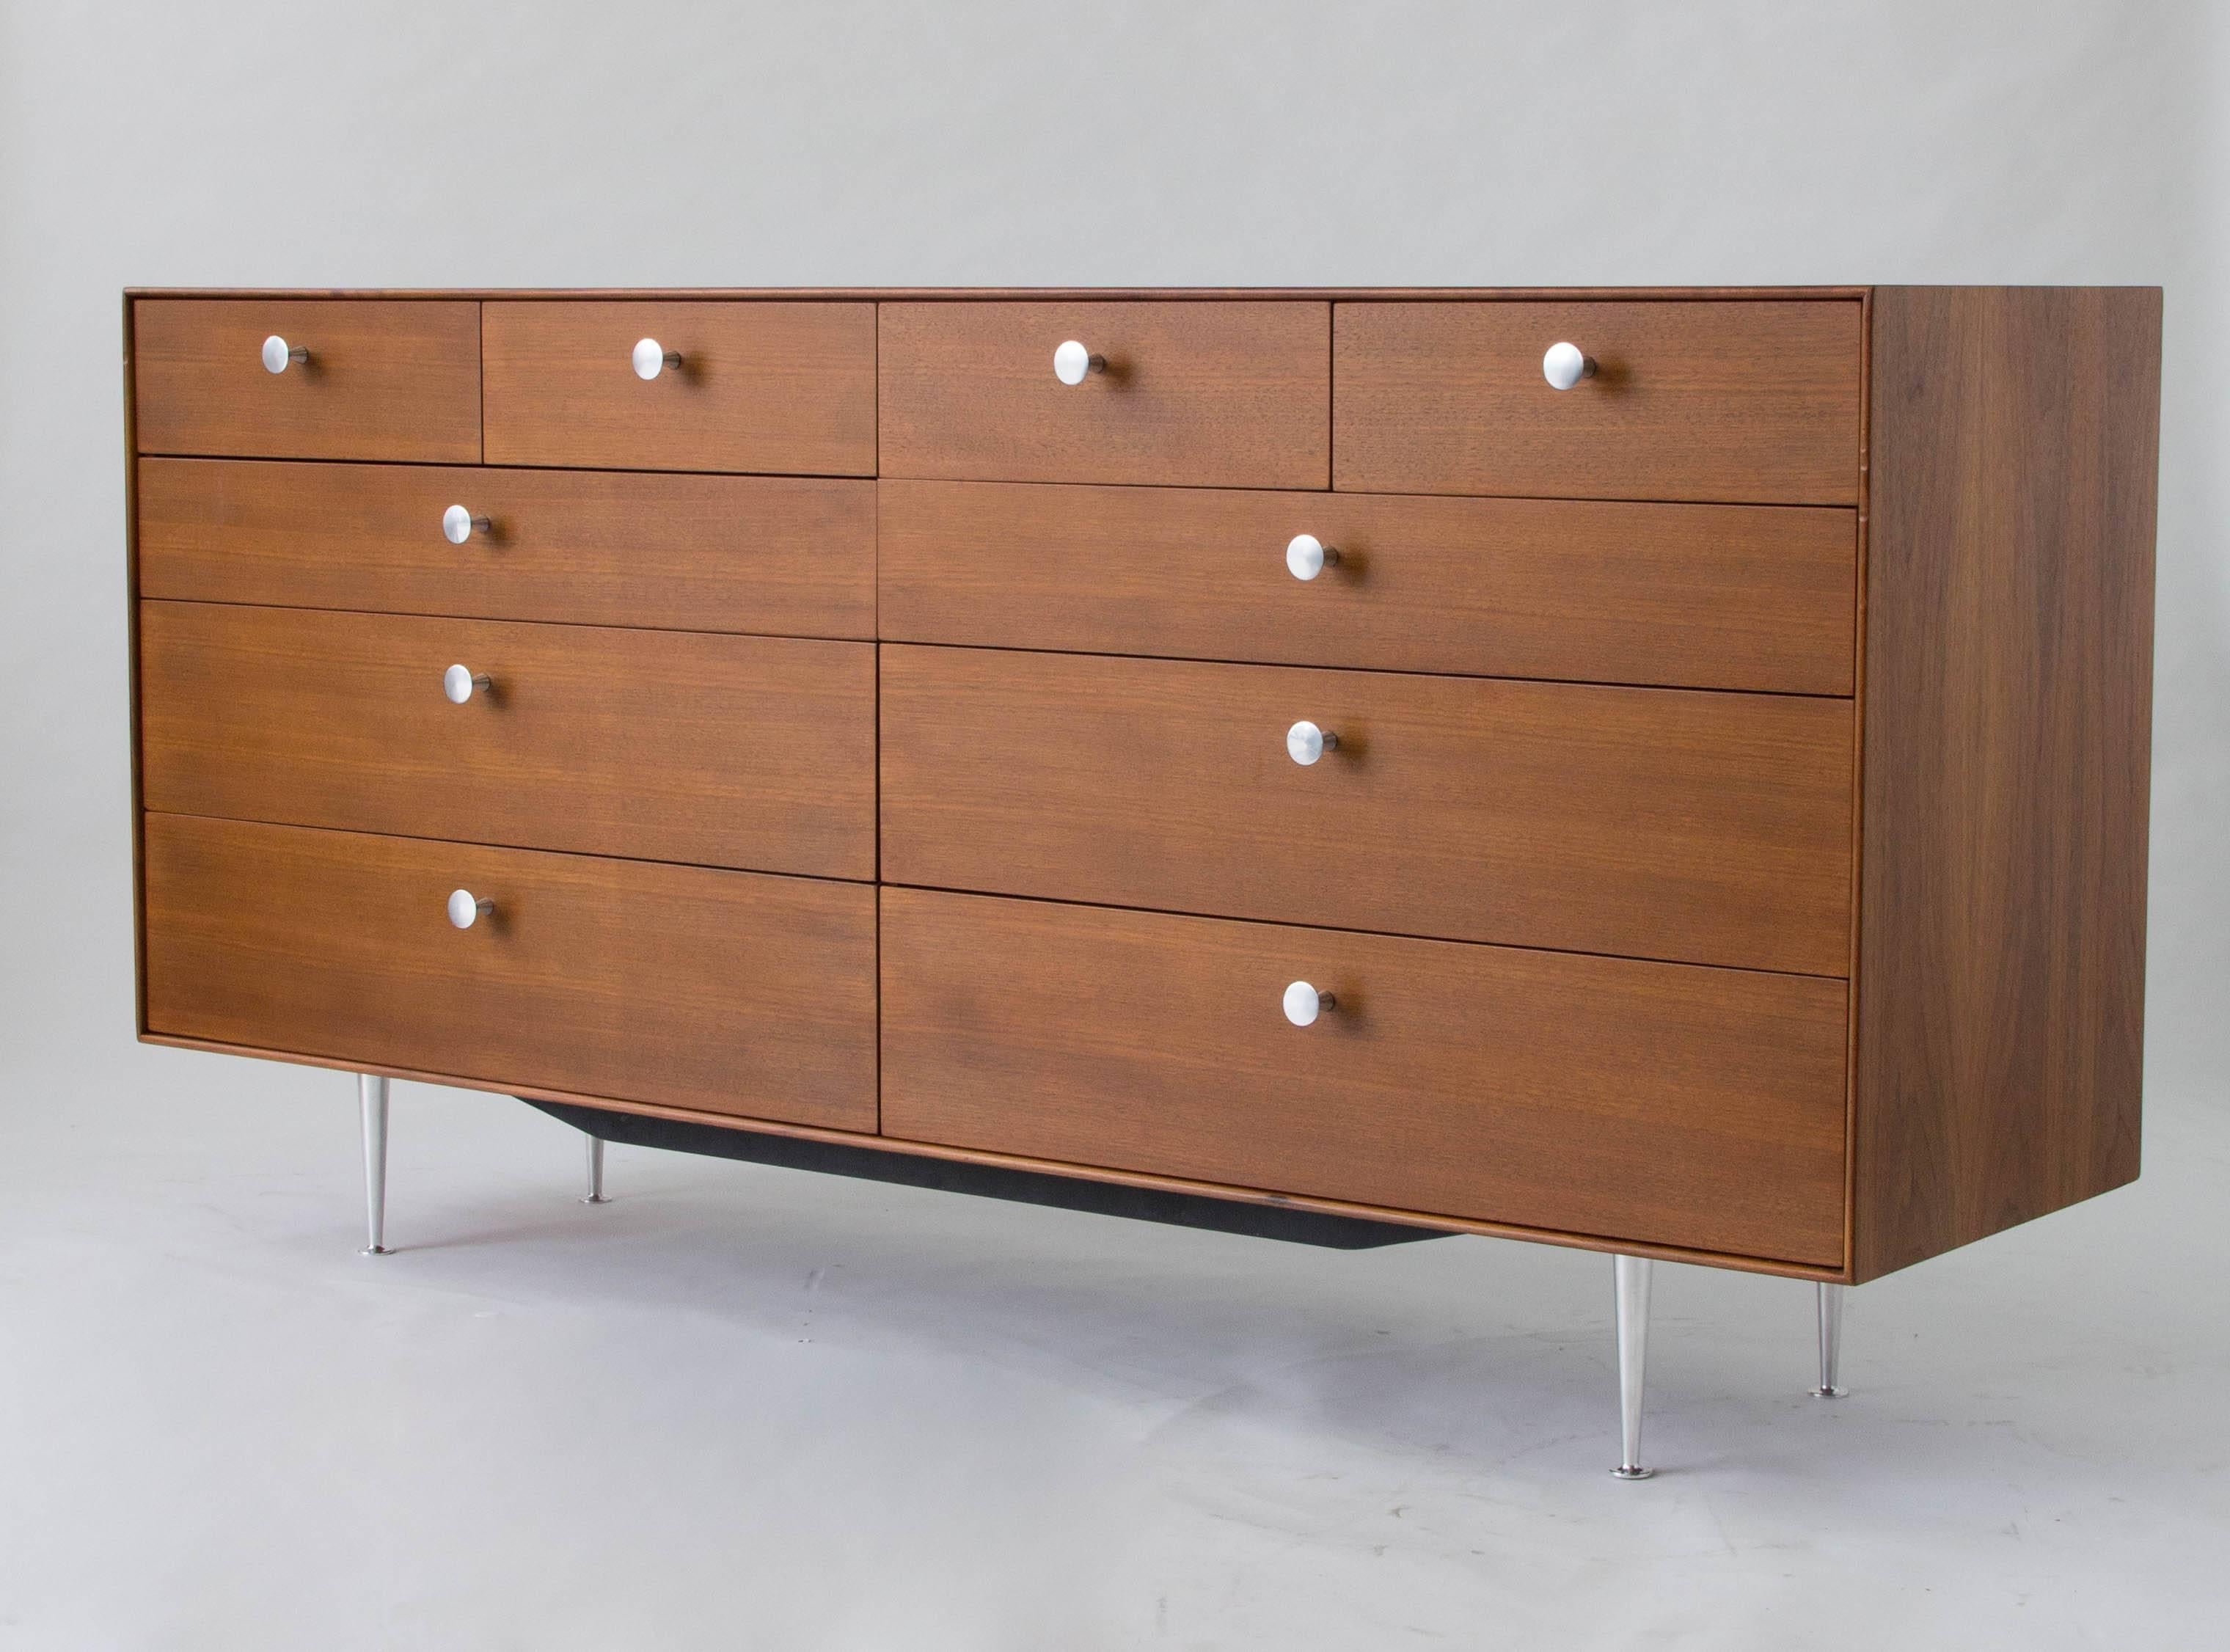 A ten-drawer double dresser from George Nelson’s Thin Edge collection for Herman Miller. Design features the slender walnut case for which the series was named and a double stack of drawers, each with three wide drawers and two smaller drawers. Each